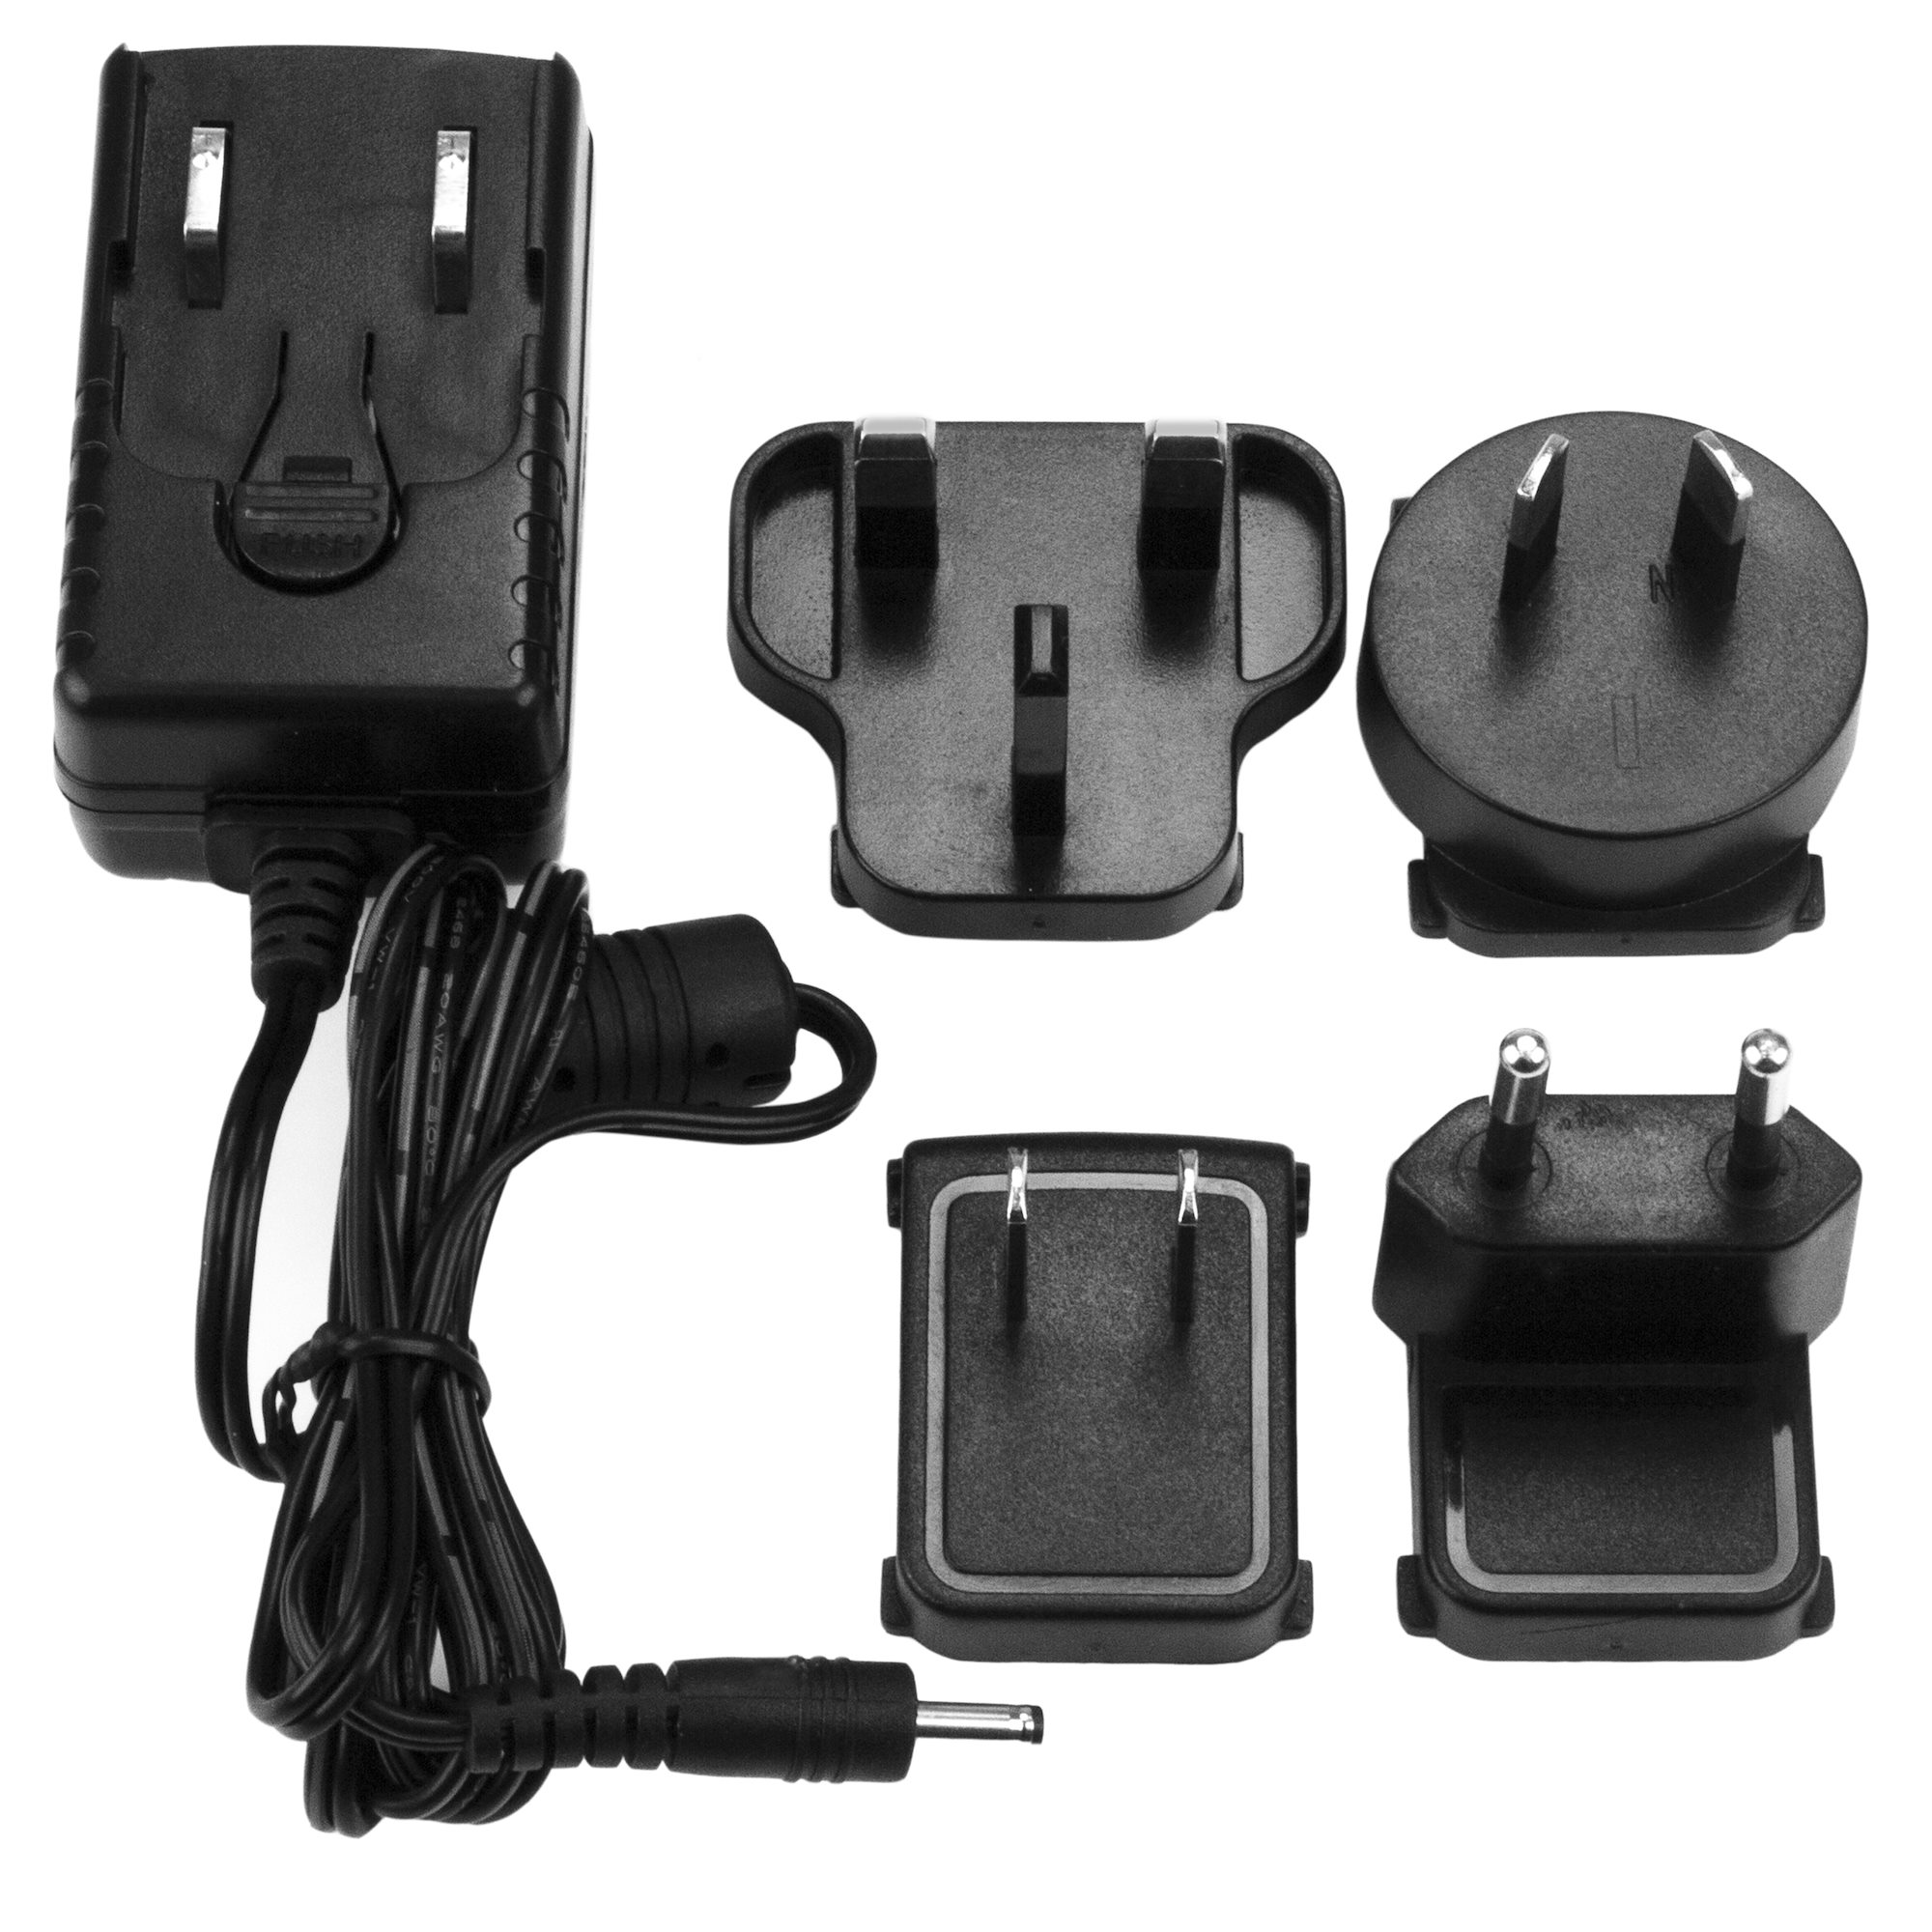 Power Adapter DC 5V 2A - Replacement Adapters | Server Rack Accessories | StarTech.com